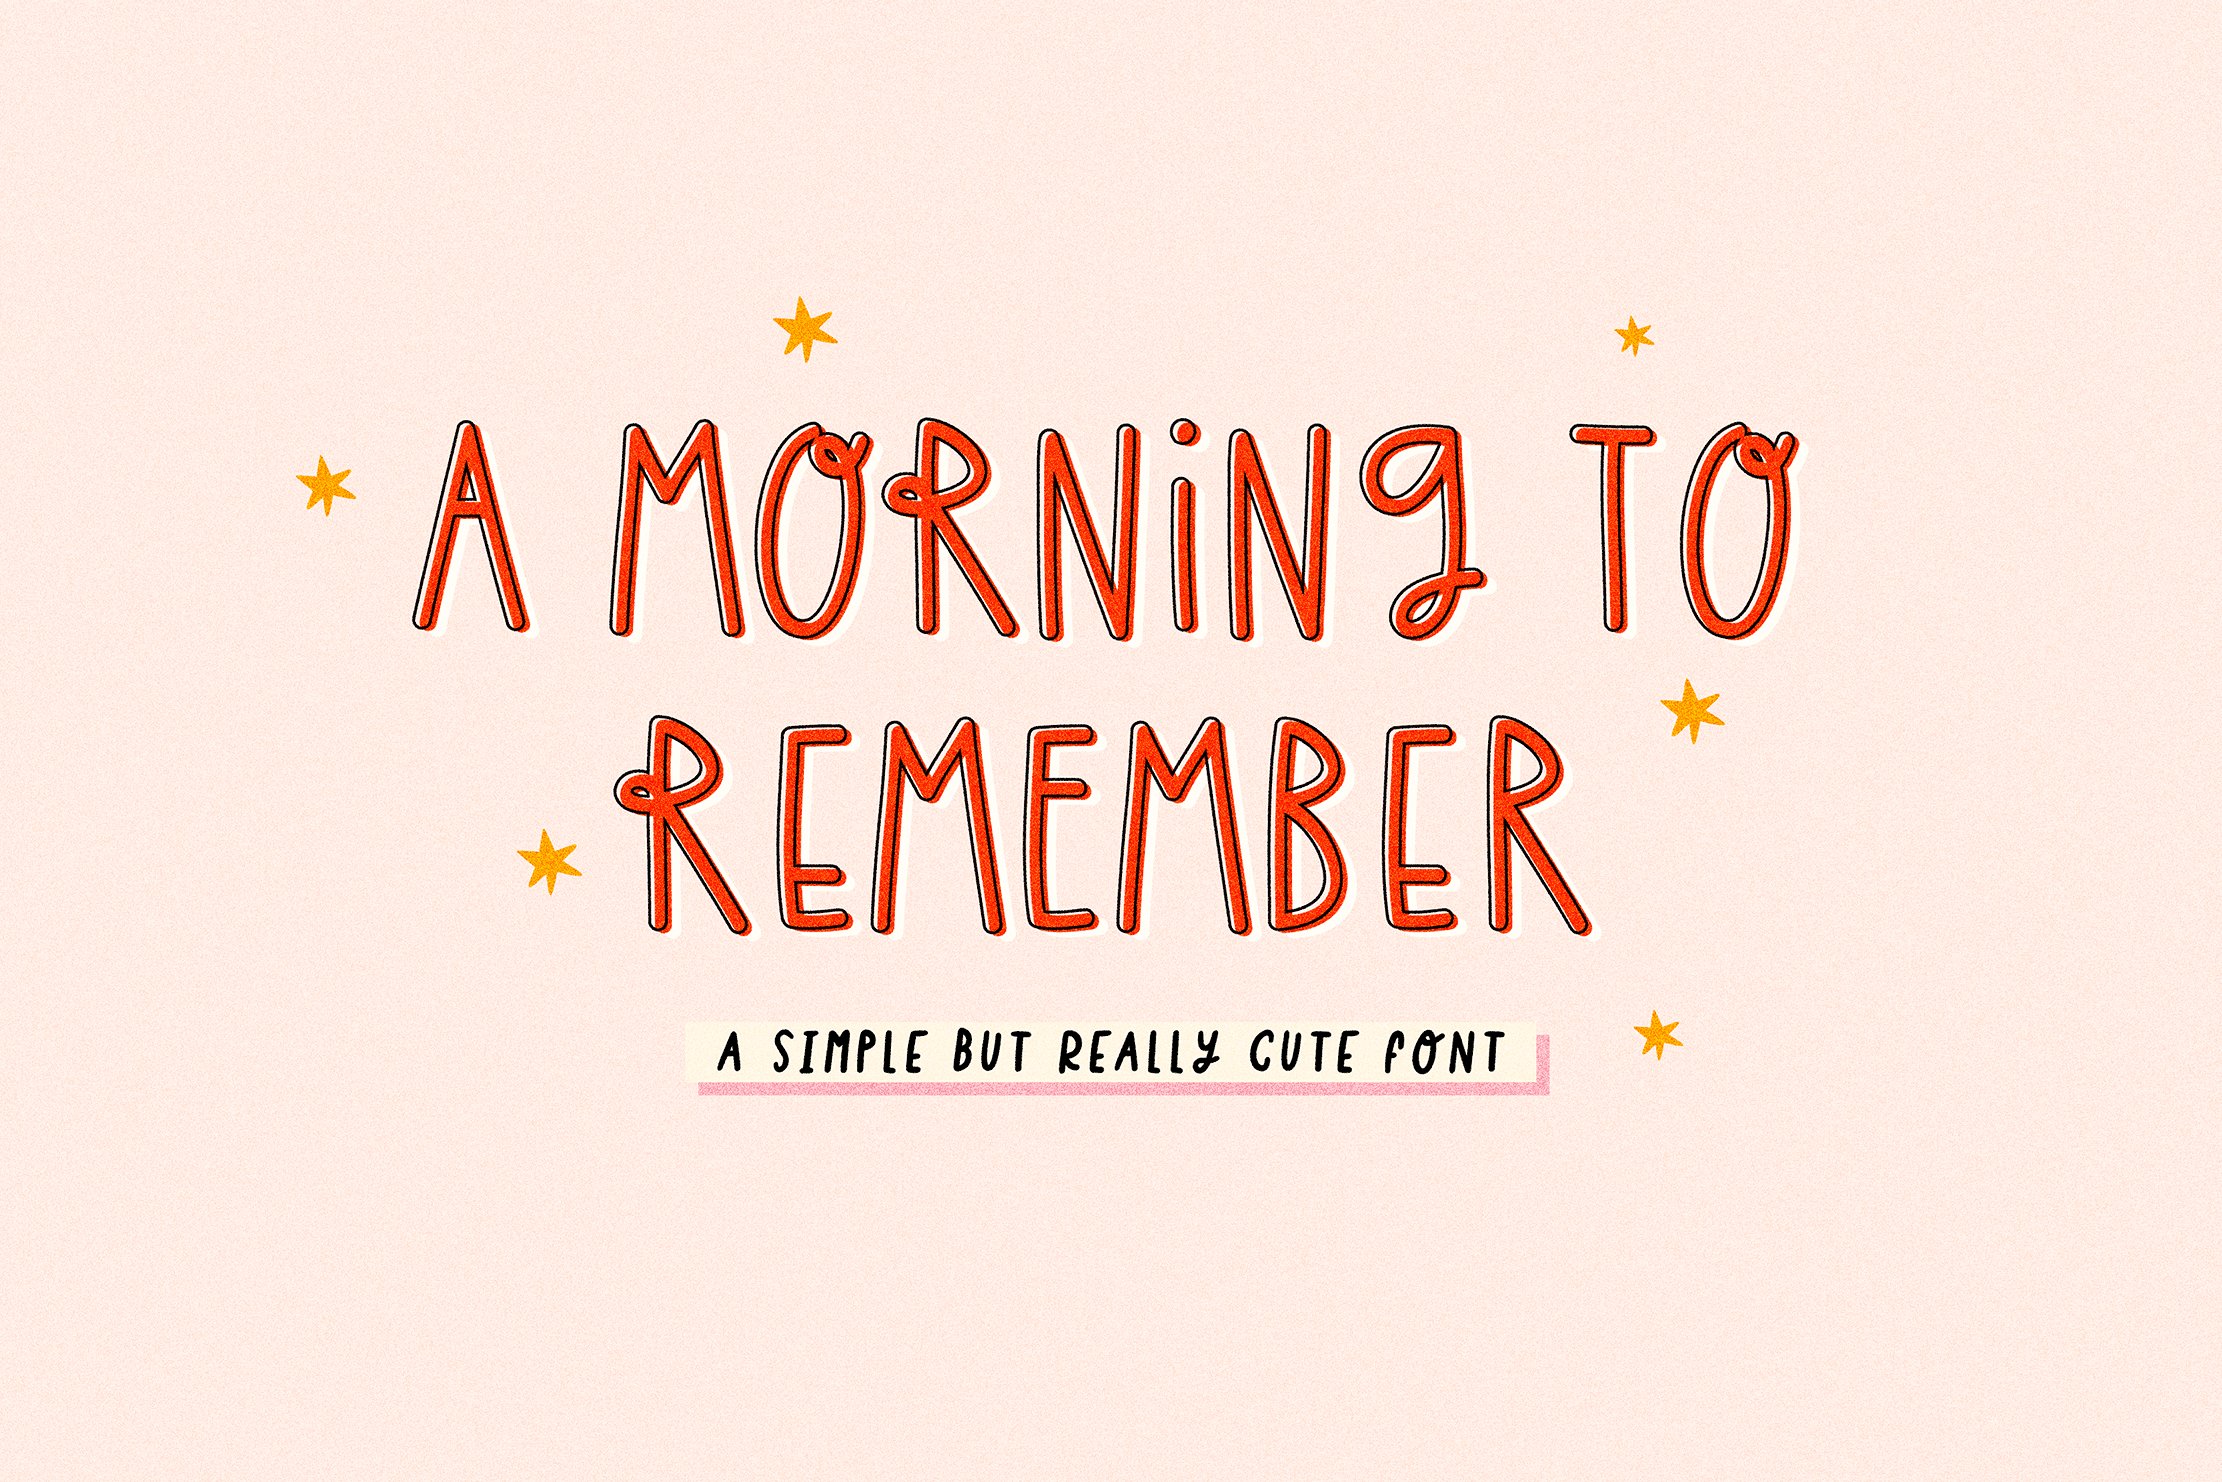 A MORNING TO REMEMBER cover image.